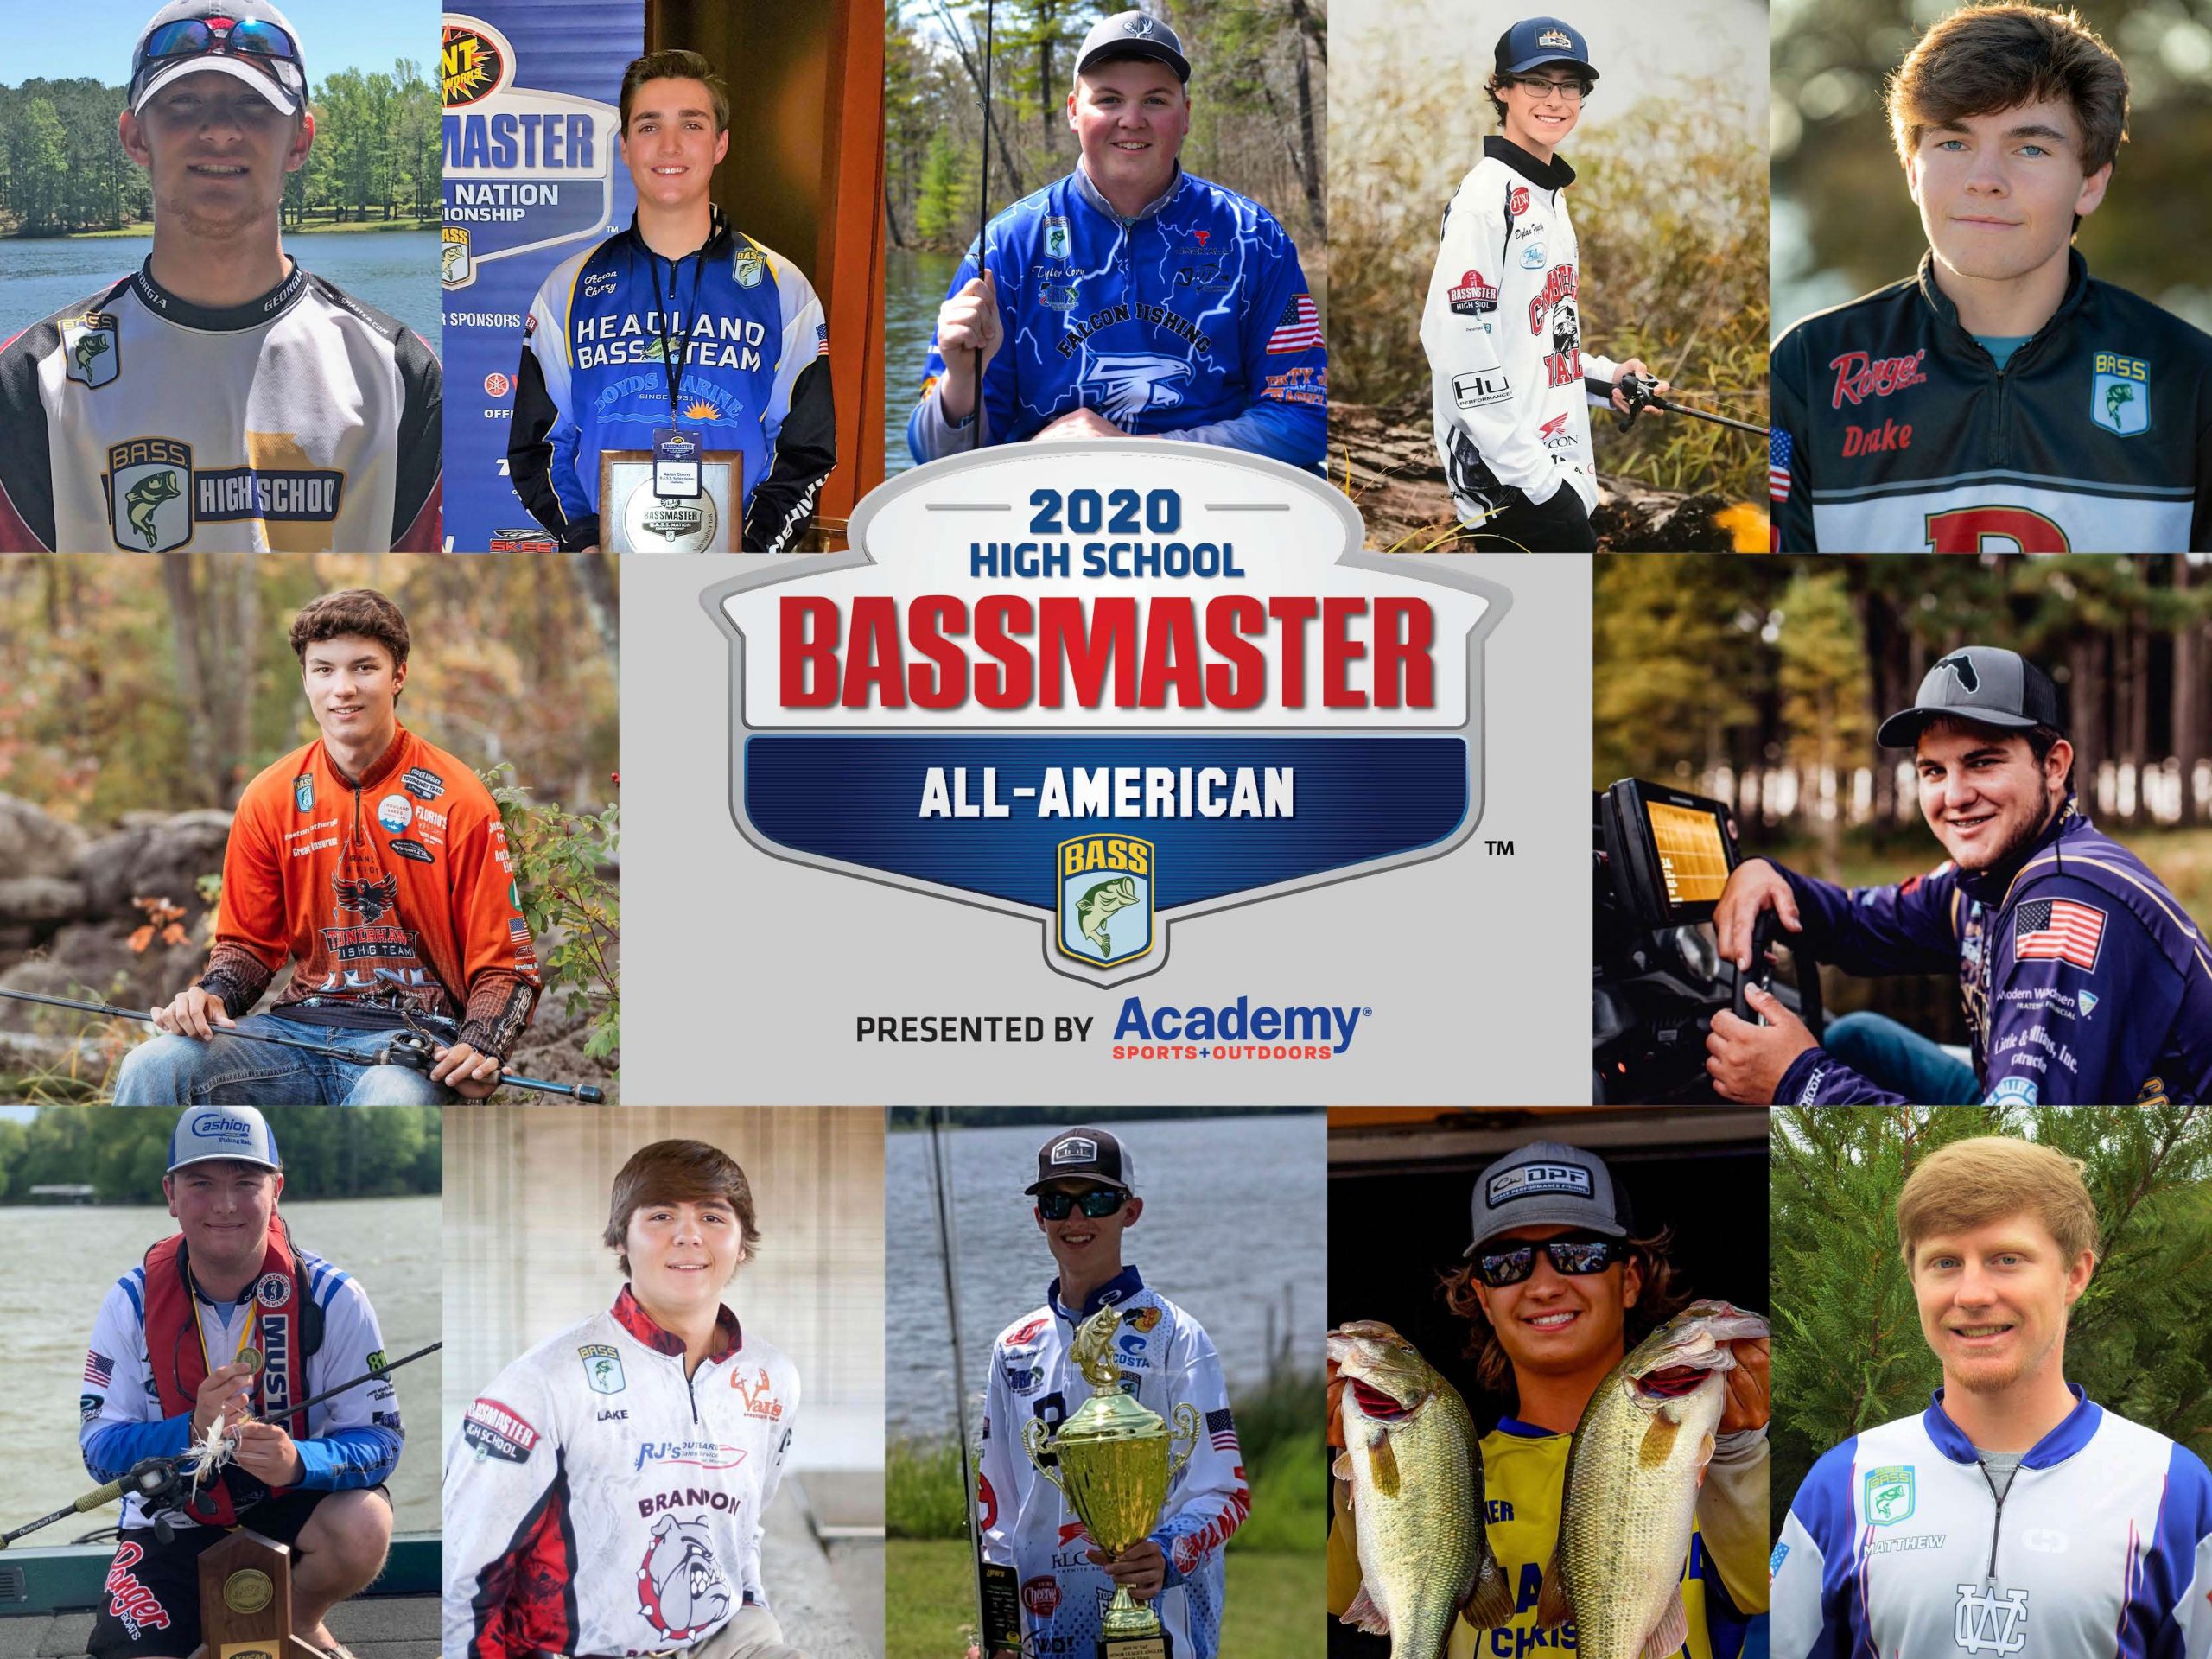 Meet the 12 outstanding high school anglers have been selected as members of the exclusive 2020 Bassmaster High School All-American Fishing Team presented by Academy Sports + Outdoors.